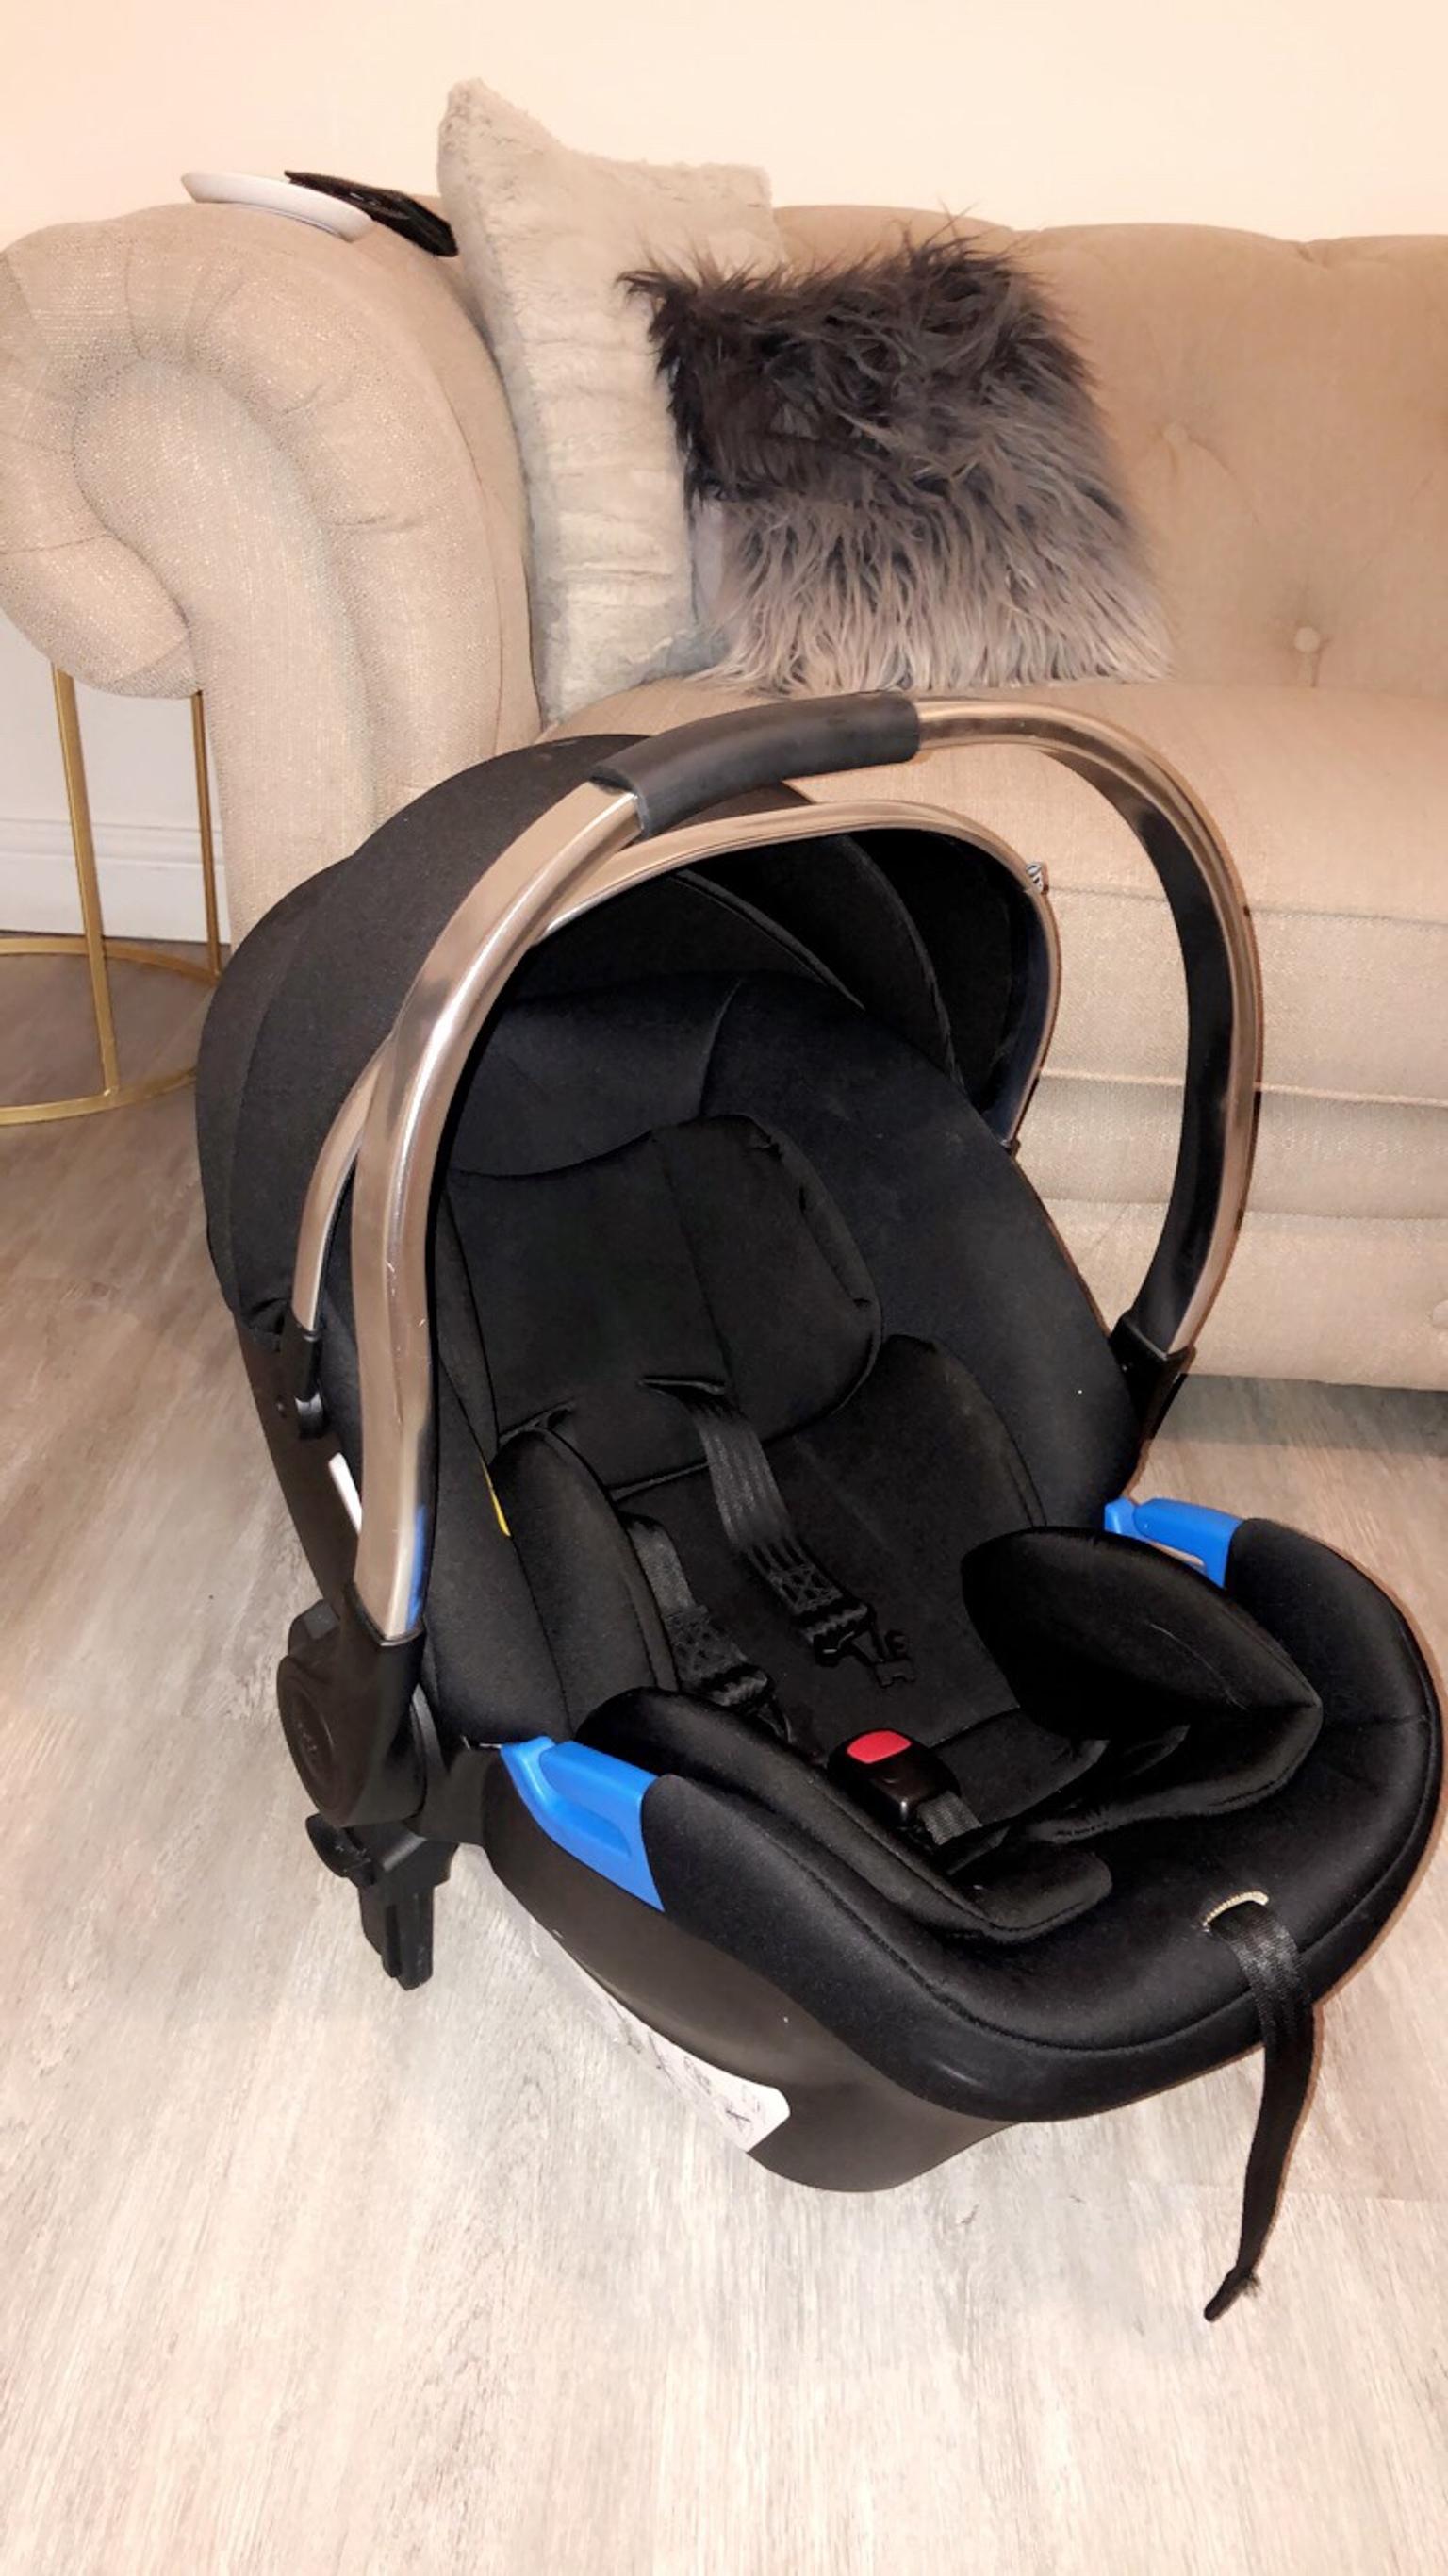 mothercare journey pushchair age